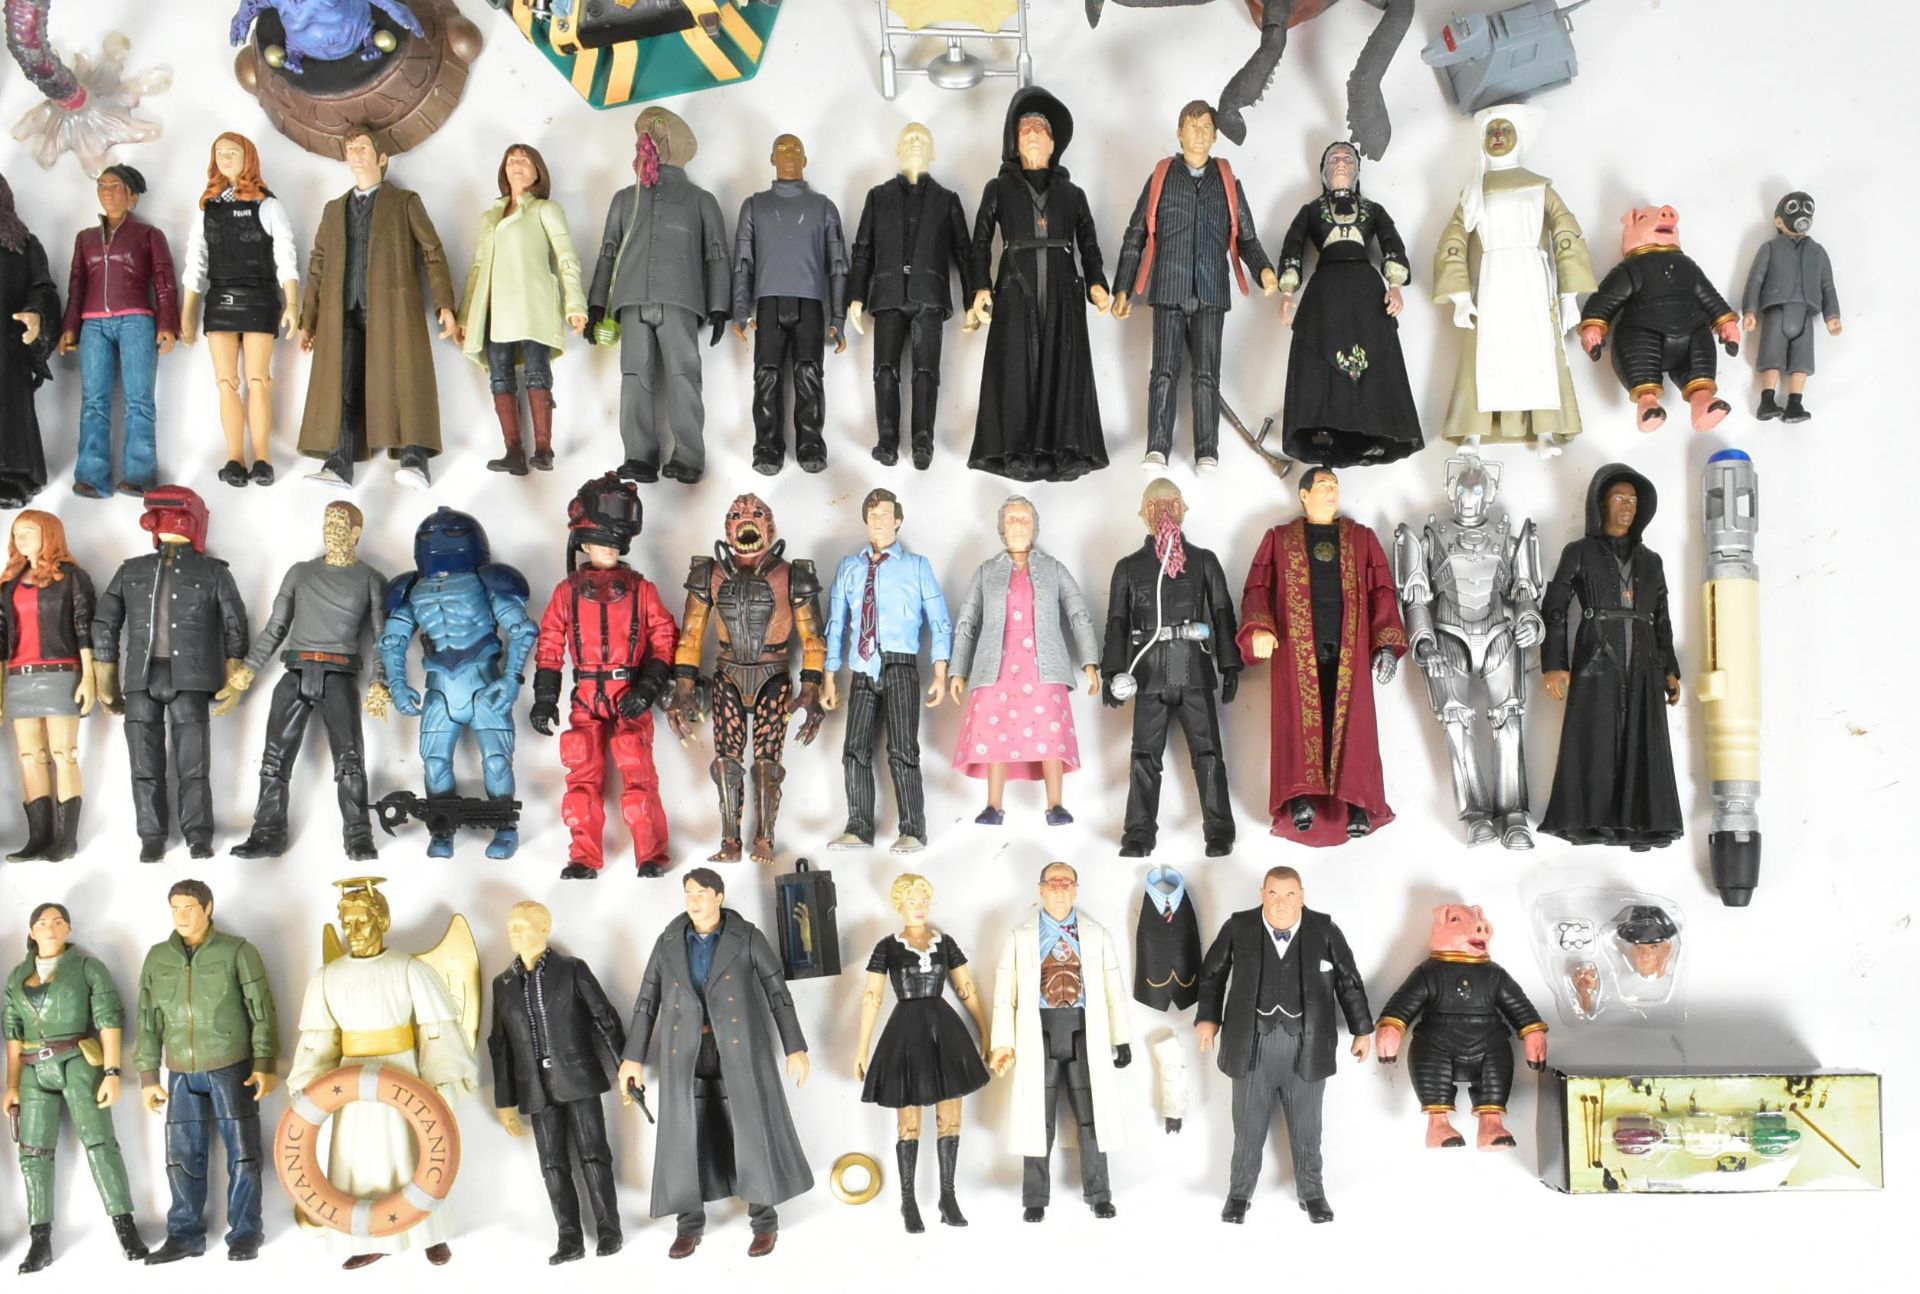 DOCTOR WHO - CHARACTER OPTIONS - LARGE COLLECTION ACTION FIGURES - Image 10 of 10